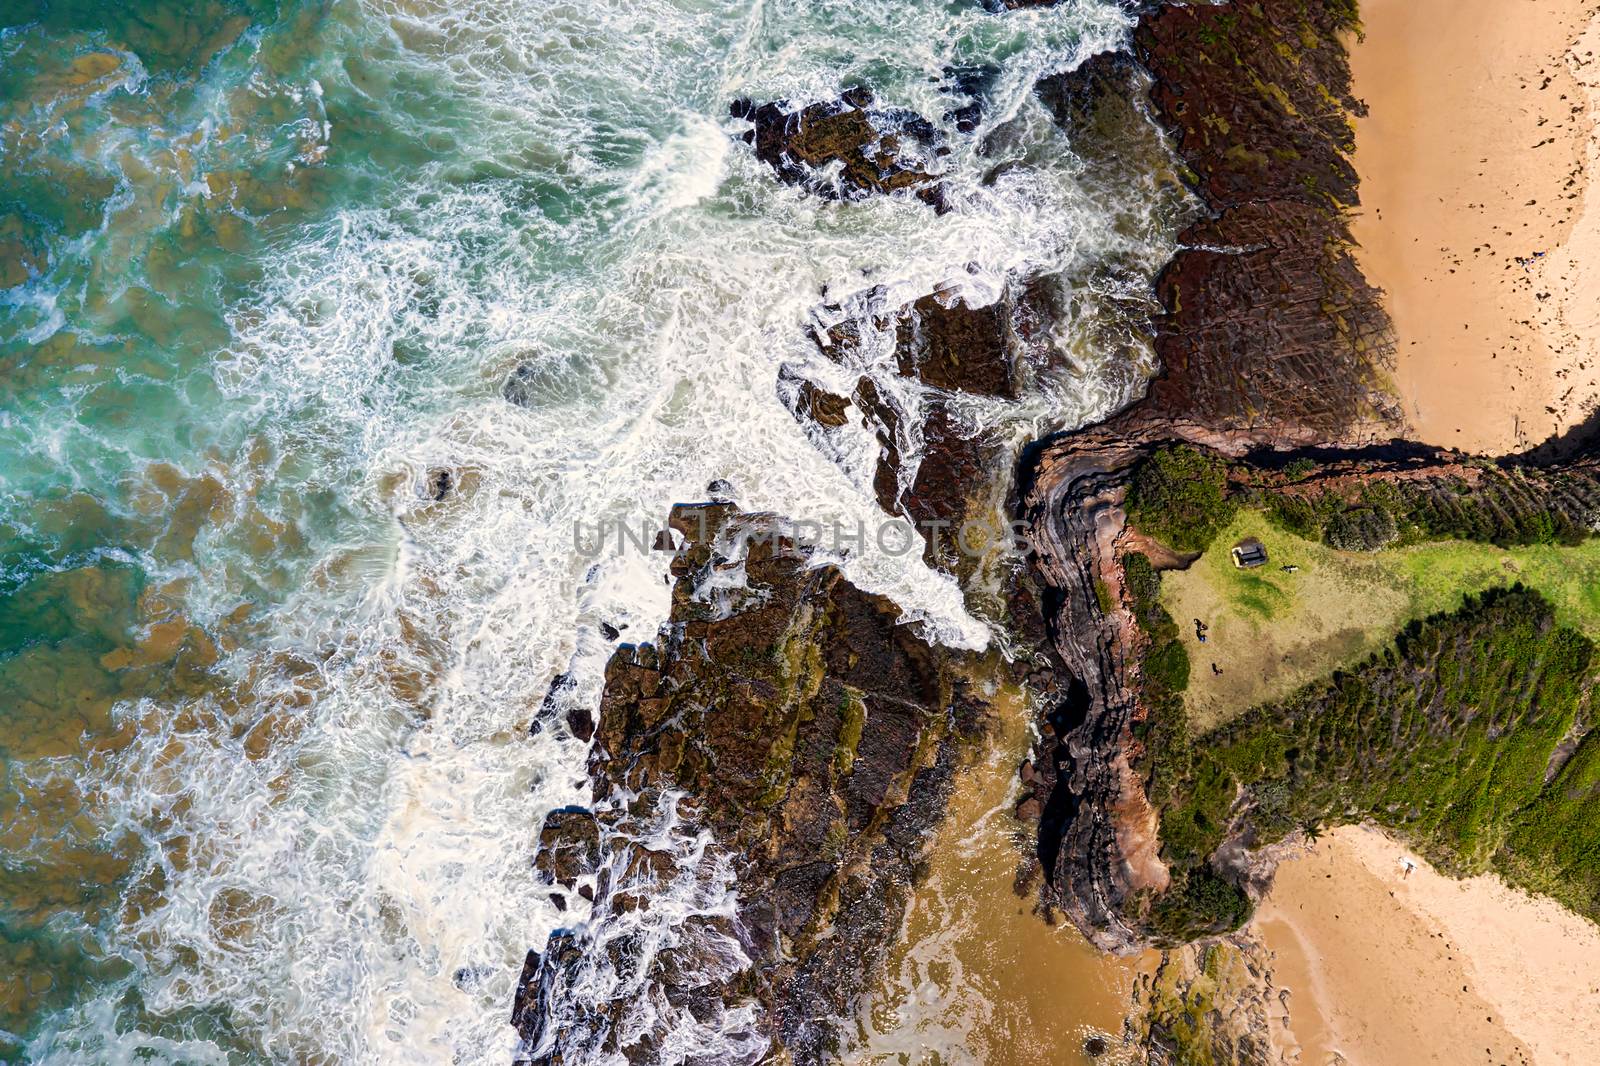 Aerial views over the steep headland to the rocky shores and beach below by lovleah